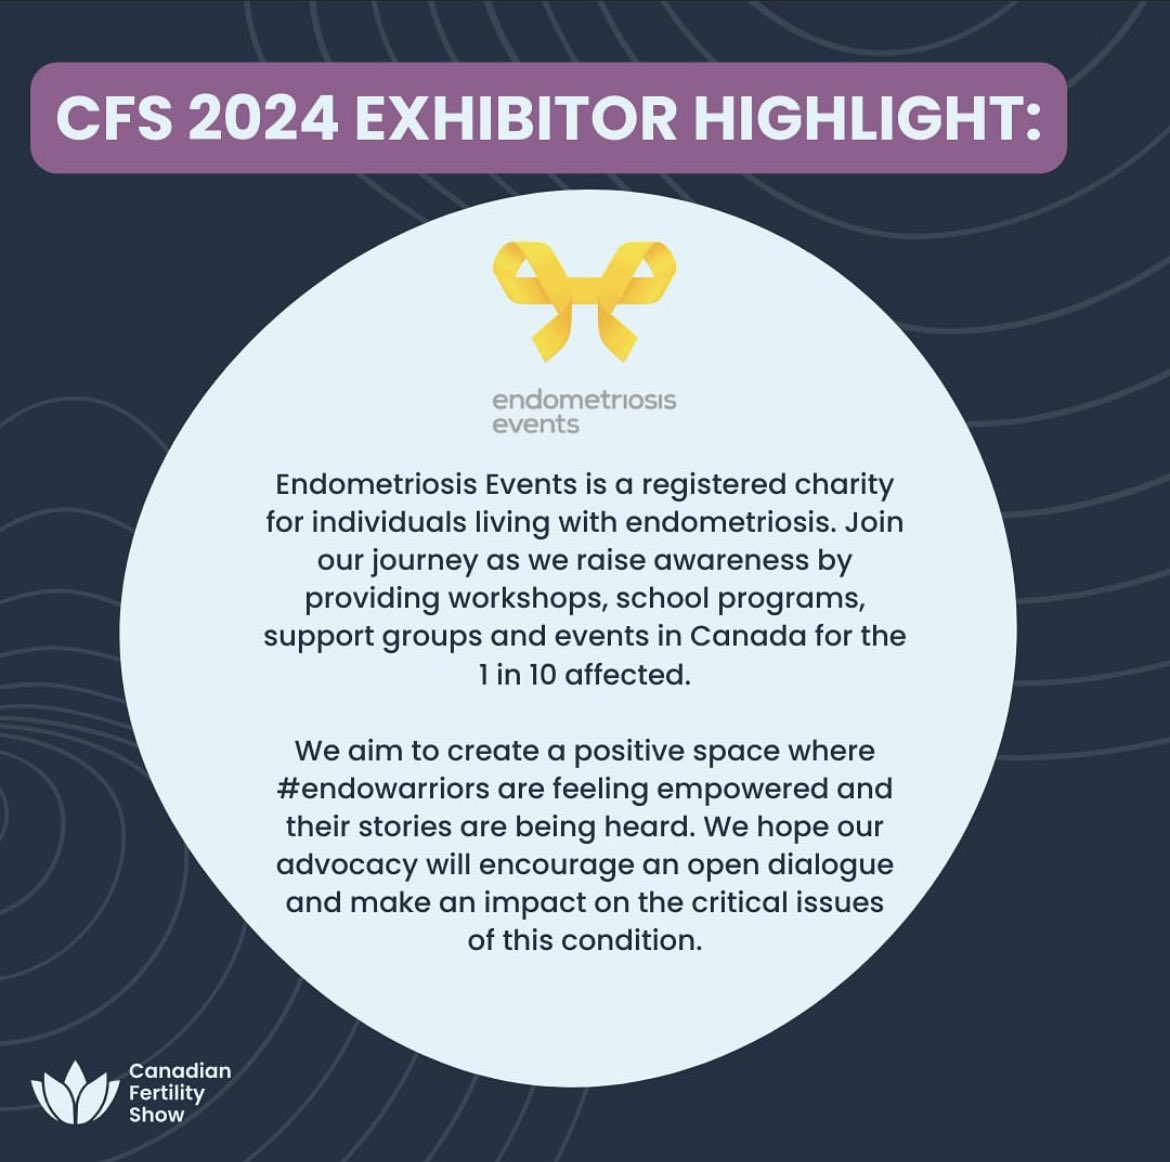 ⏳TWO WEEK COUNTDOWN… Stop by our booth at the #CanadianFertilityShow as we continue to raise awareness of #endometriosis. 🗓️ April 20 at 9:00 a.m.-5:00 p.m. International Centre, Mississauga 🎟️ Tickets available now! Save with discount code: ENDO24 canadianfertilityshow.ca